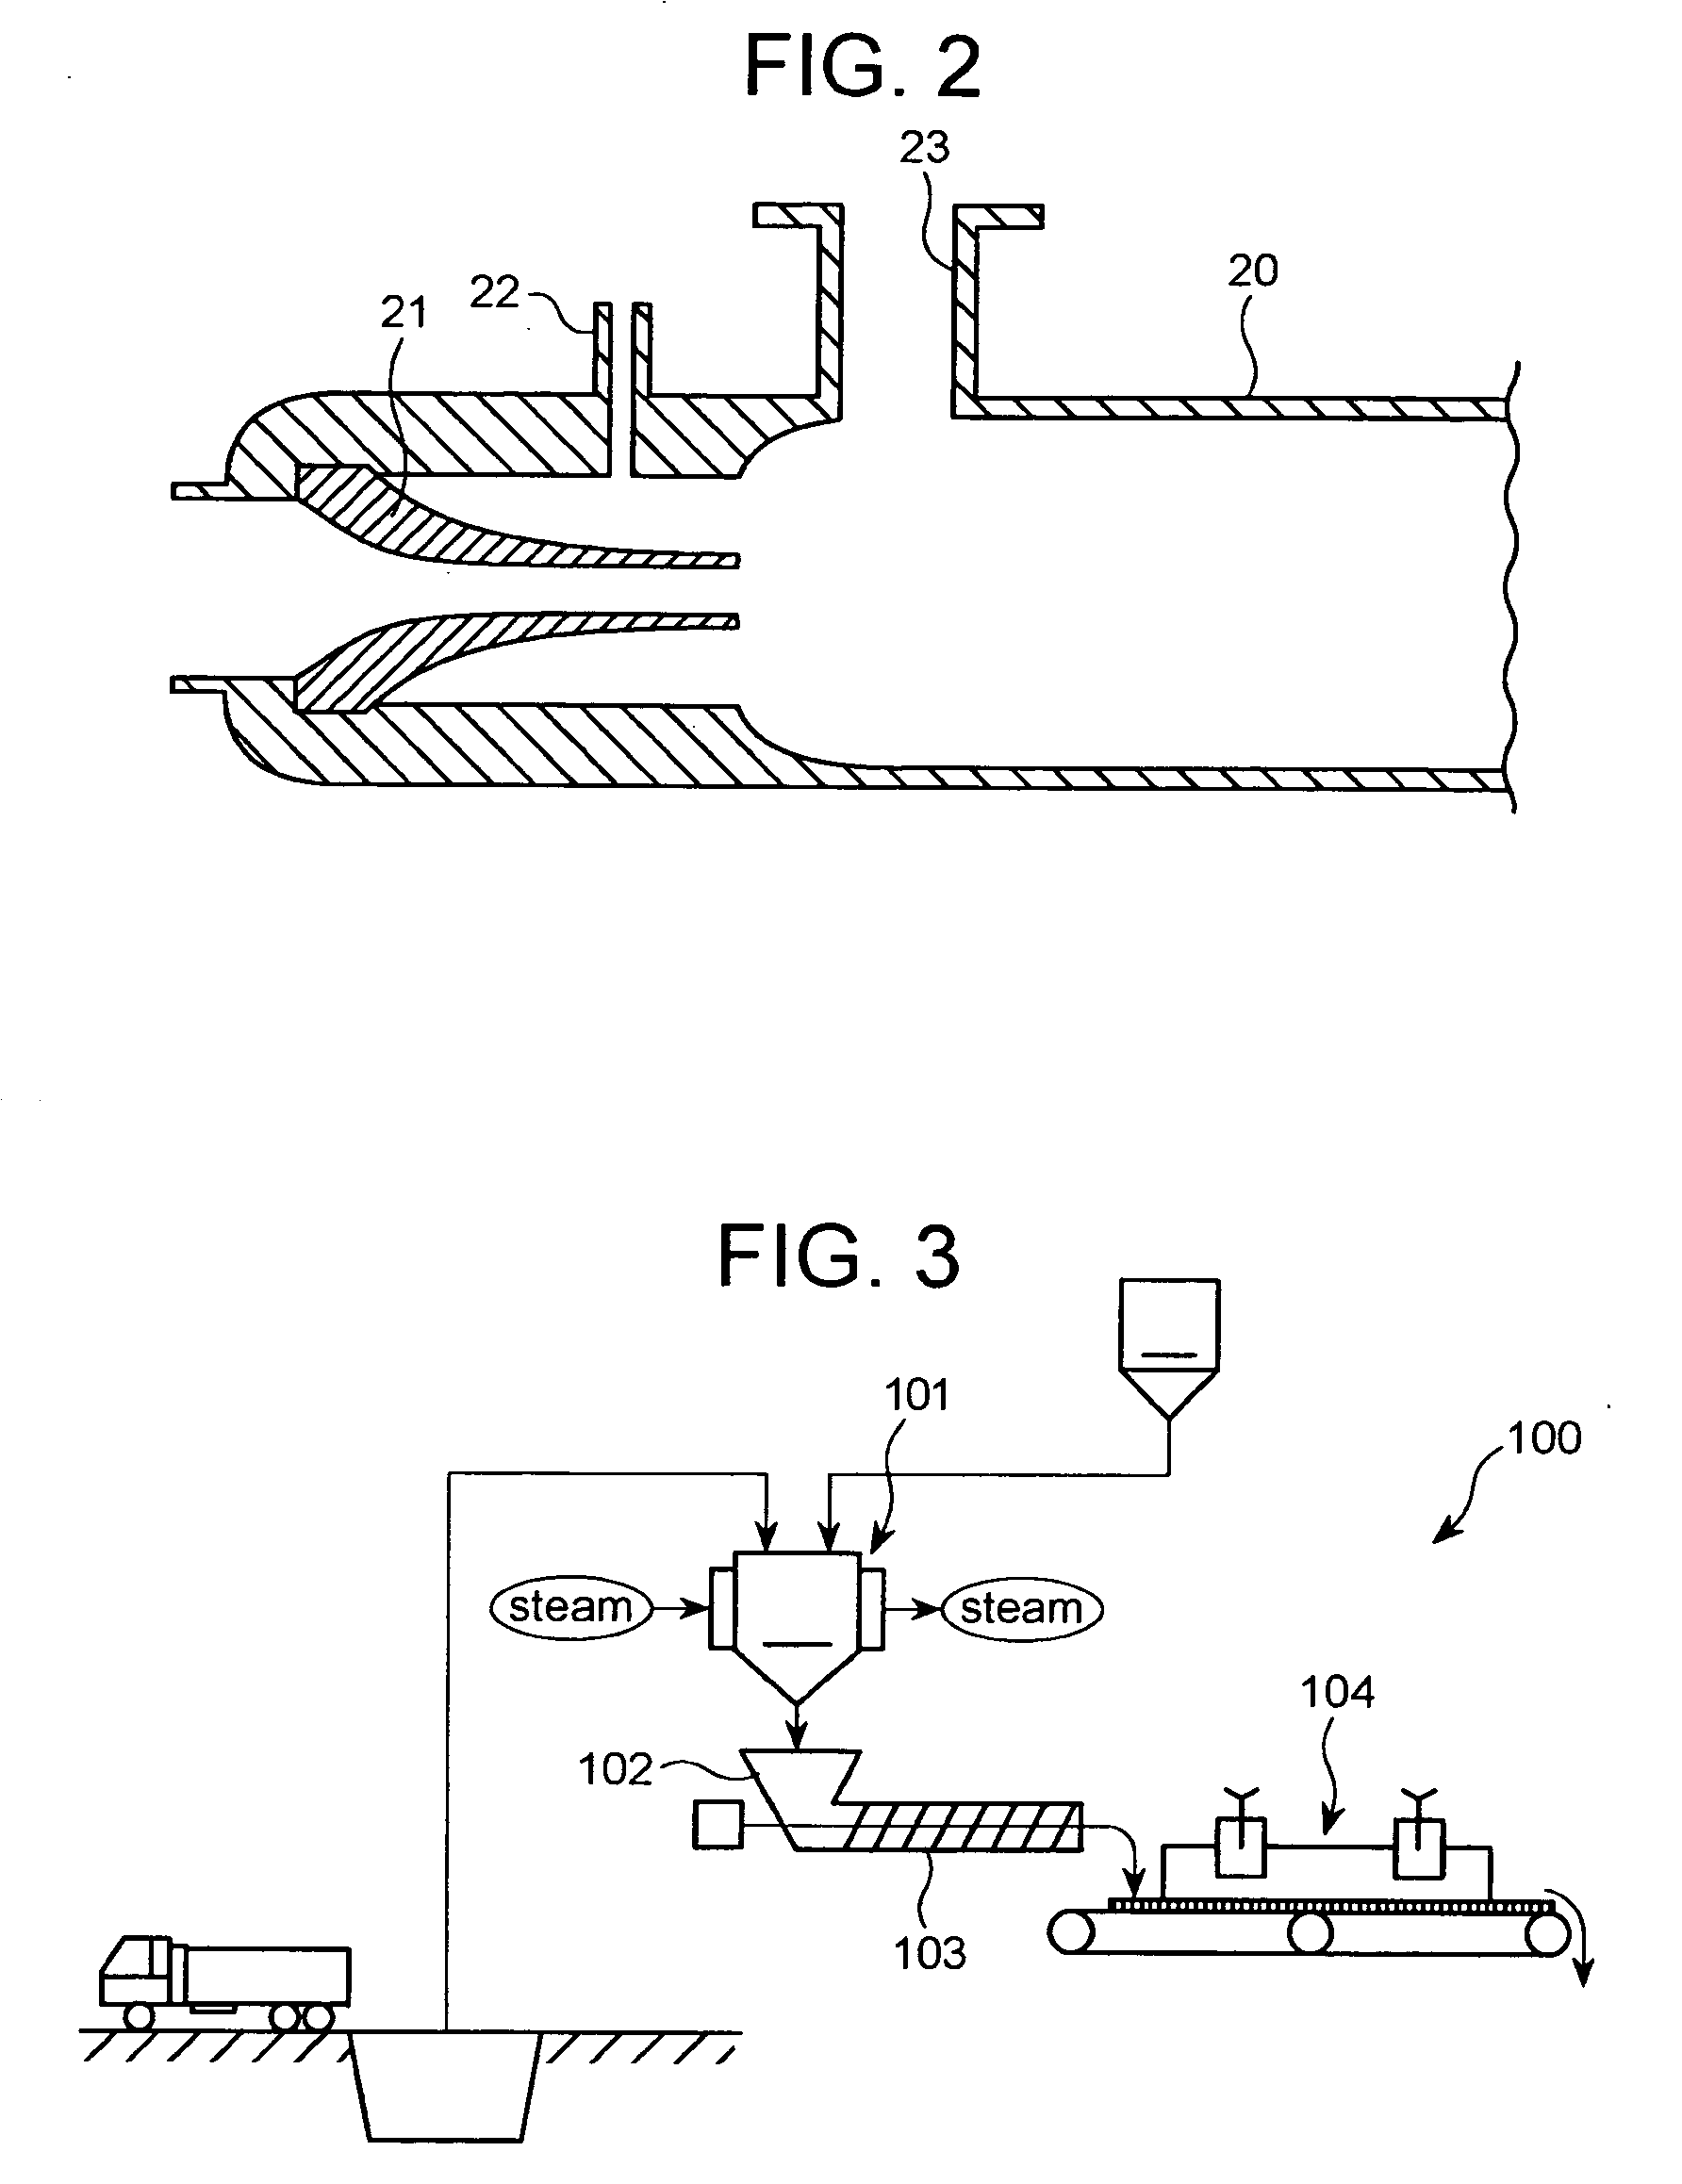 Apparatus for detoxifying compositions containing heavy metal and a method of detoxification